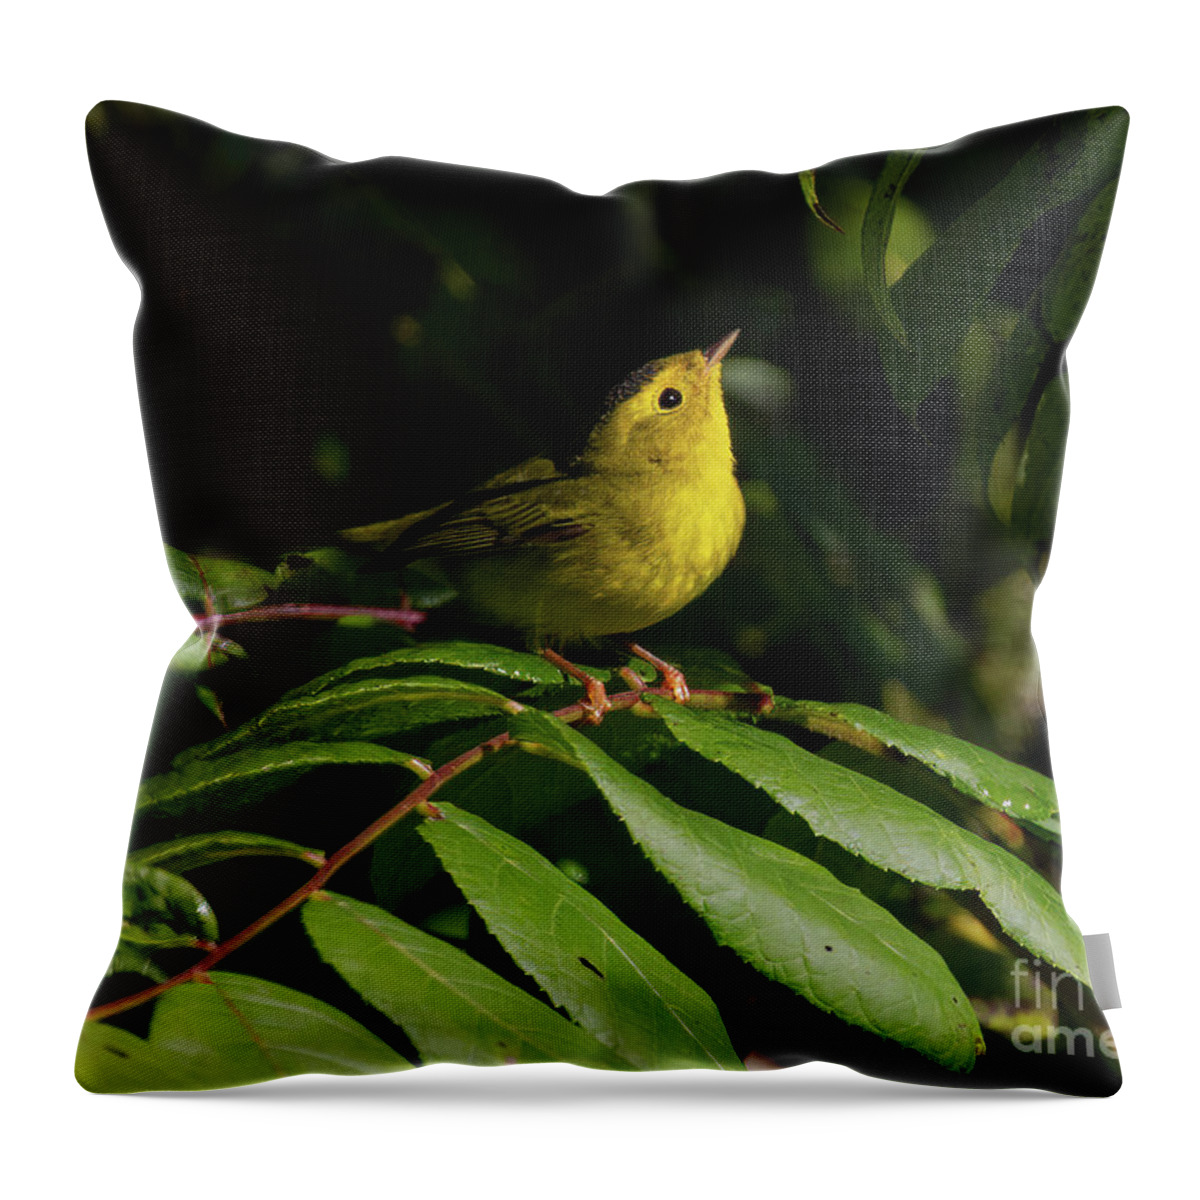 Birds Throw Pillow featuring the photograph Keep Looking Up by Chris Scroggins